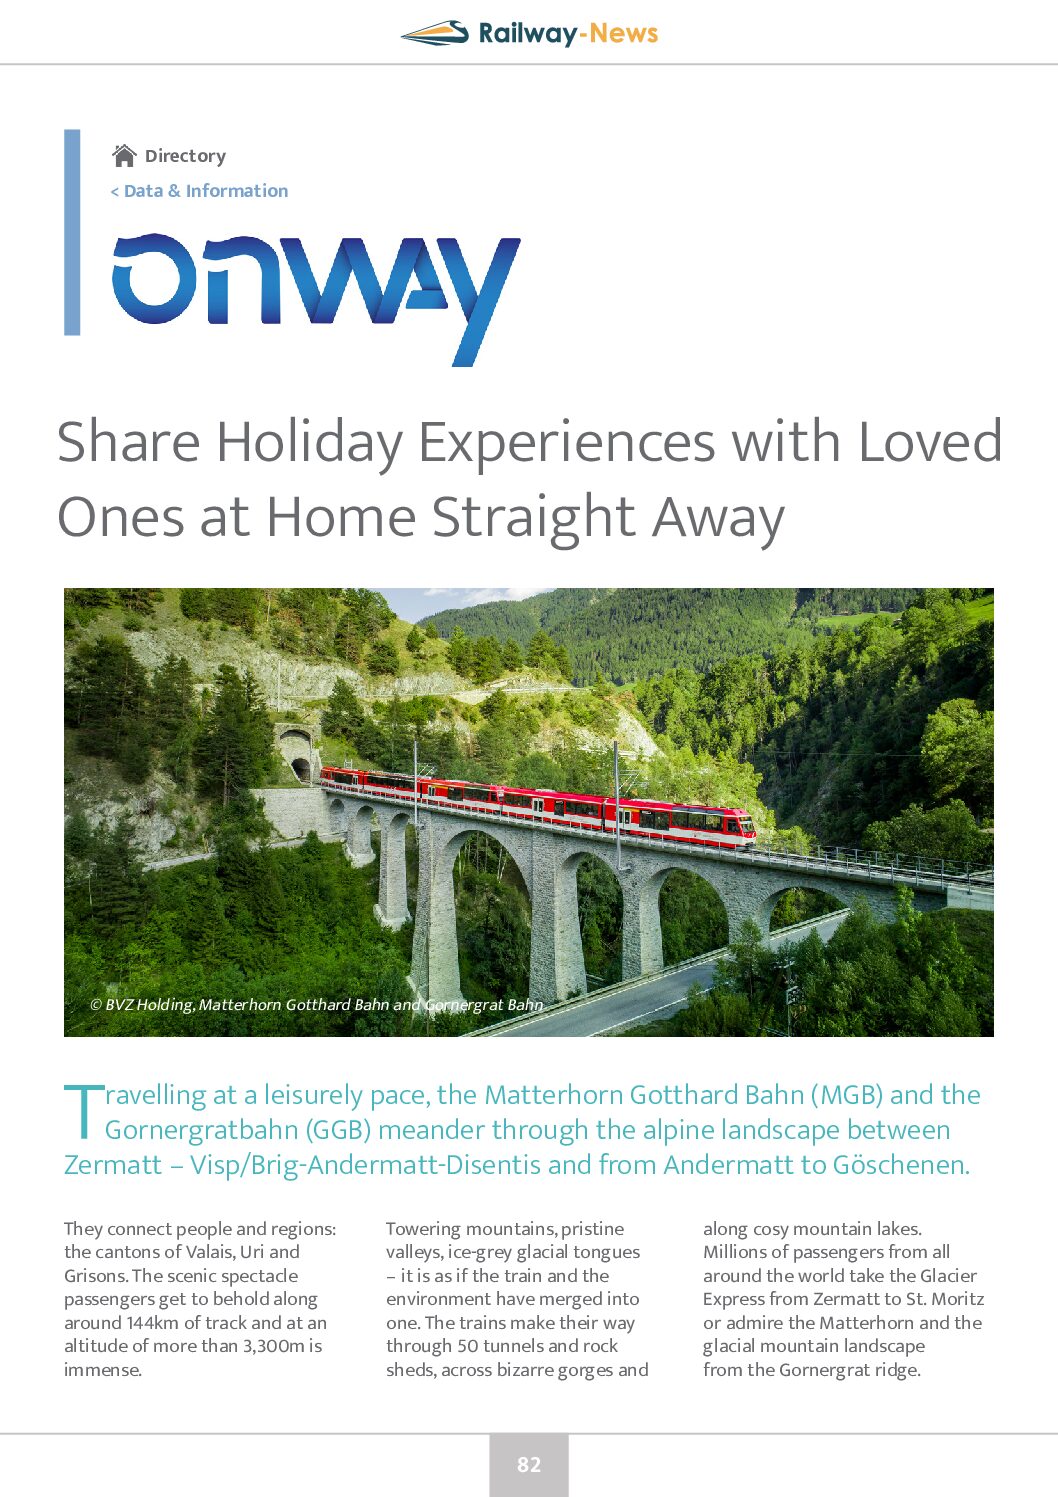 Share Holiday Experiences with Loved Ones at Home Straight Away